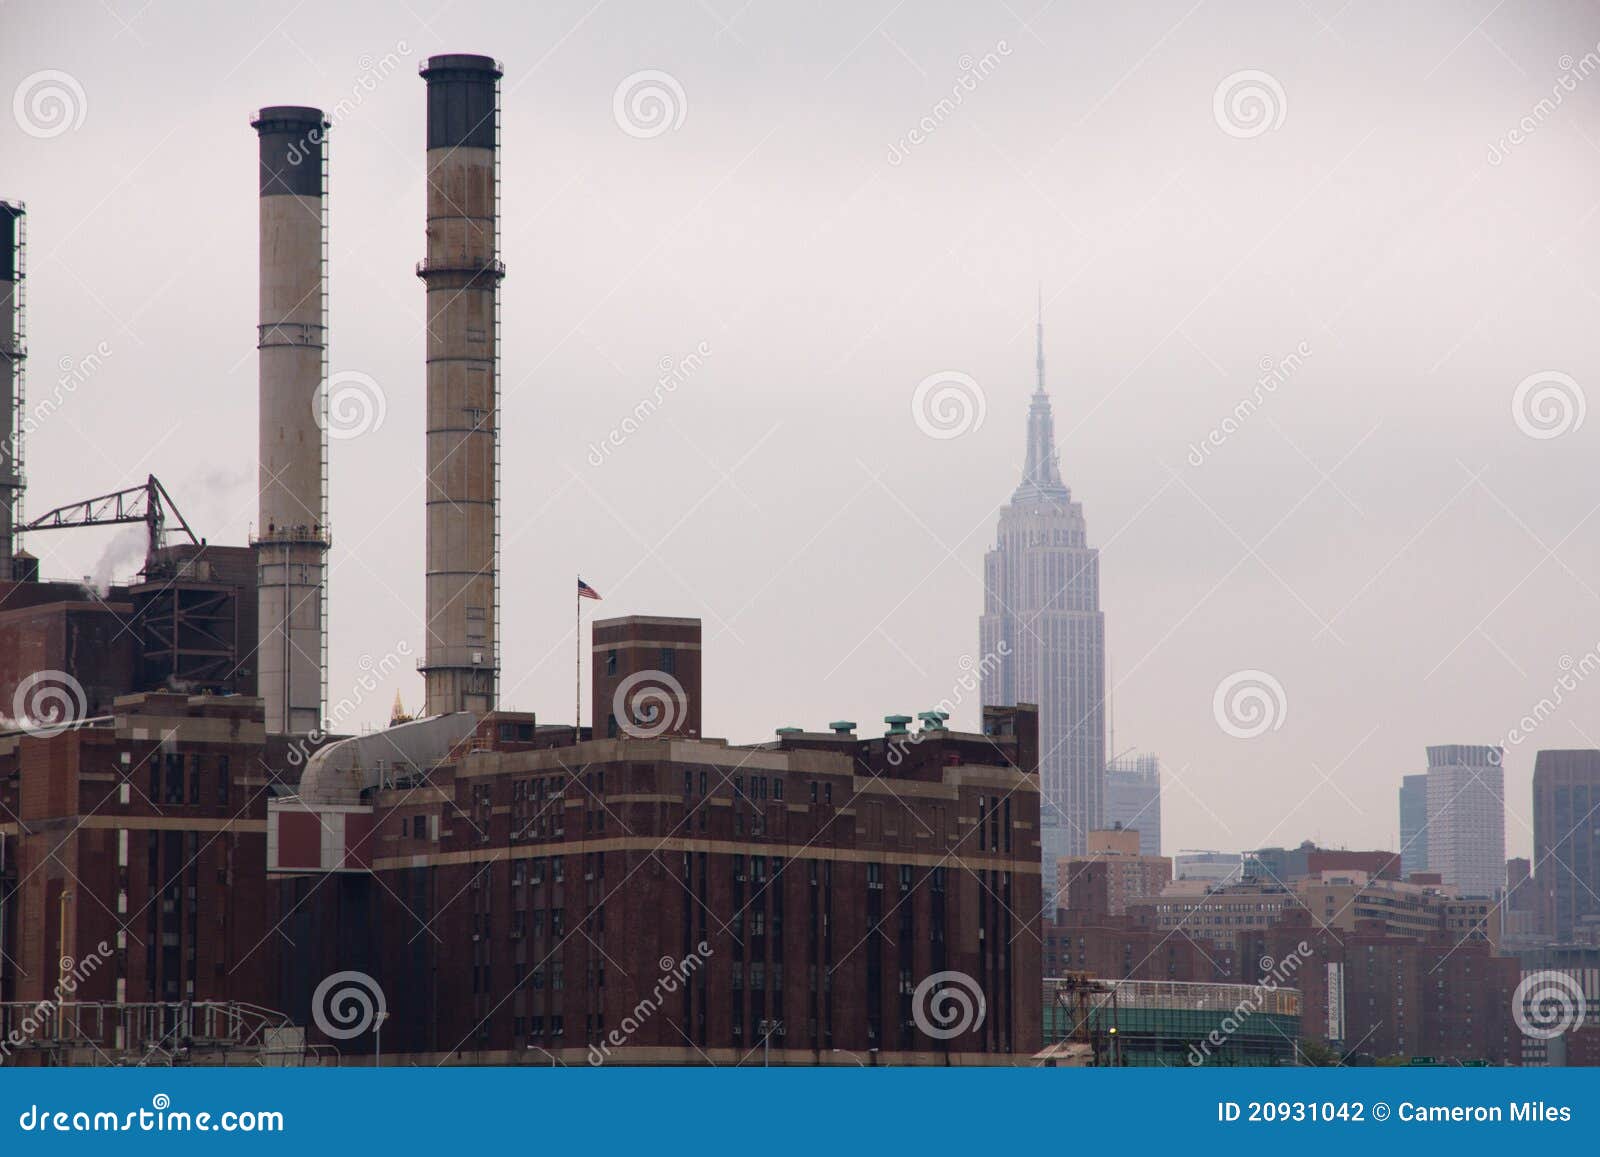 Factory New York Stock Photography - Image: 20931042